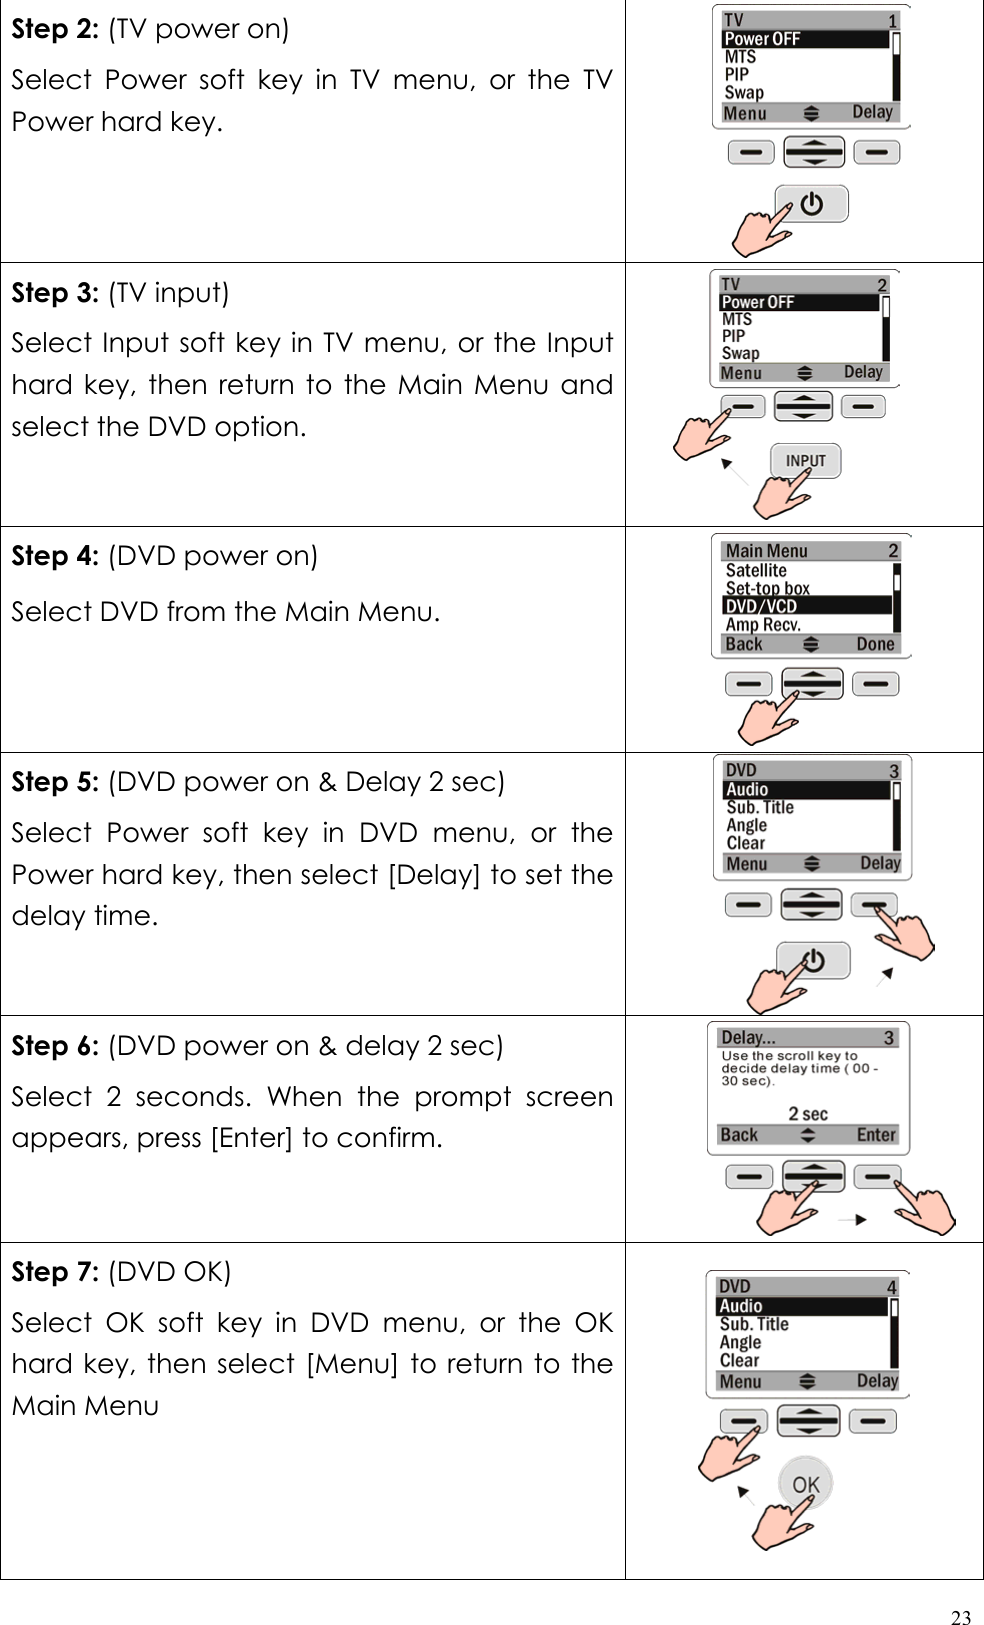  23Step 2: (TV power on) Select Power soft key in TV menu, or the TV Power hard key.  Step 3: (TV input) Select Input soft key in TV menu, or the Input hard key, then return to the Main Menu and select the DVD option.  Step 4: (DVD power on) Select DVD from the Main Menu.  Step 5: (DVD power on &amp; Delay 2 sec)   Select Power soft key in DVD menu, or the Power hard key, then select [Delay] to set the delay time.  Step 6: (DVD power on &amp; delay 2 sec) Select 2 seconds. When the prompt screen appears, press [Enter] to confirm.       Step 7: (DVD OK) Select OK soft key in DVD menu, or the OK hard key, then select [Menu] to return to the Main Menu    